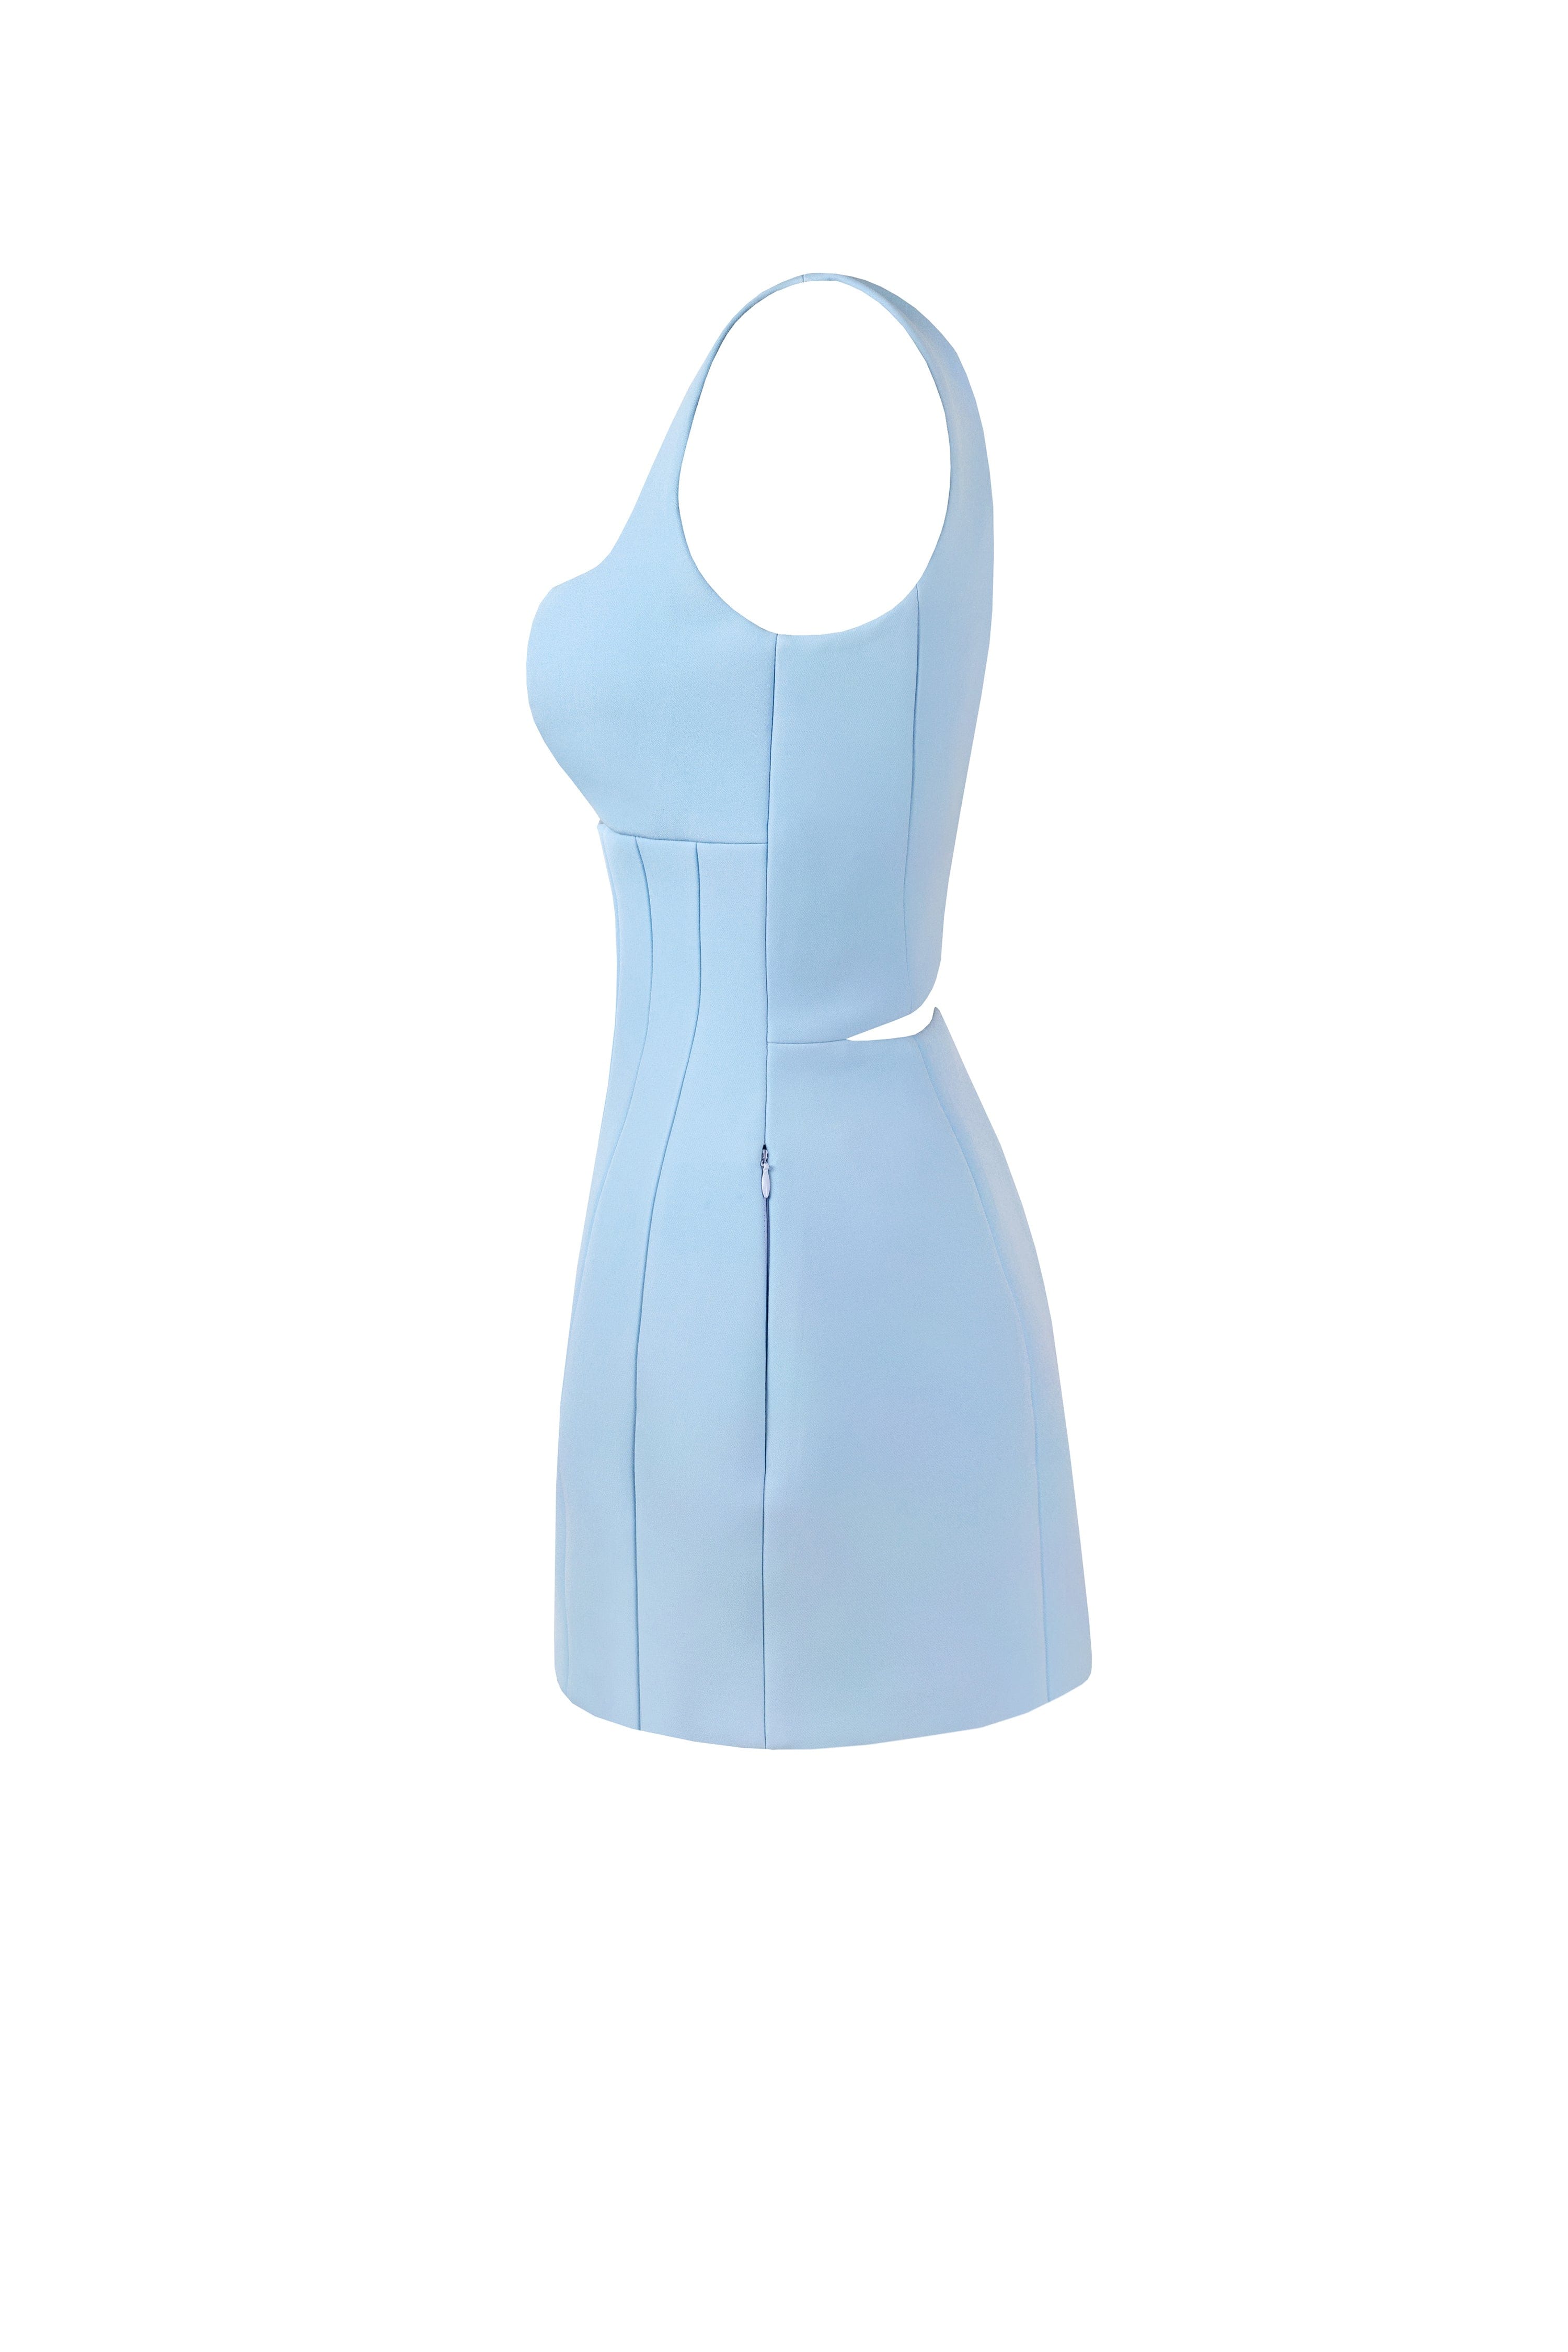 Glossy ultra mini dress in light blue with cutouts